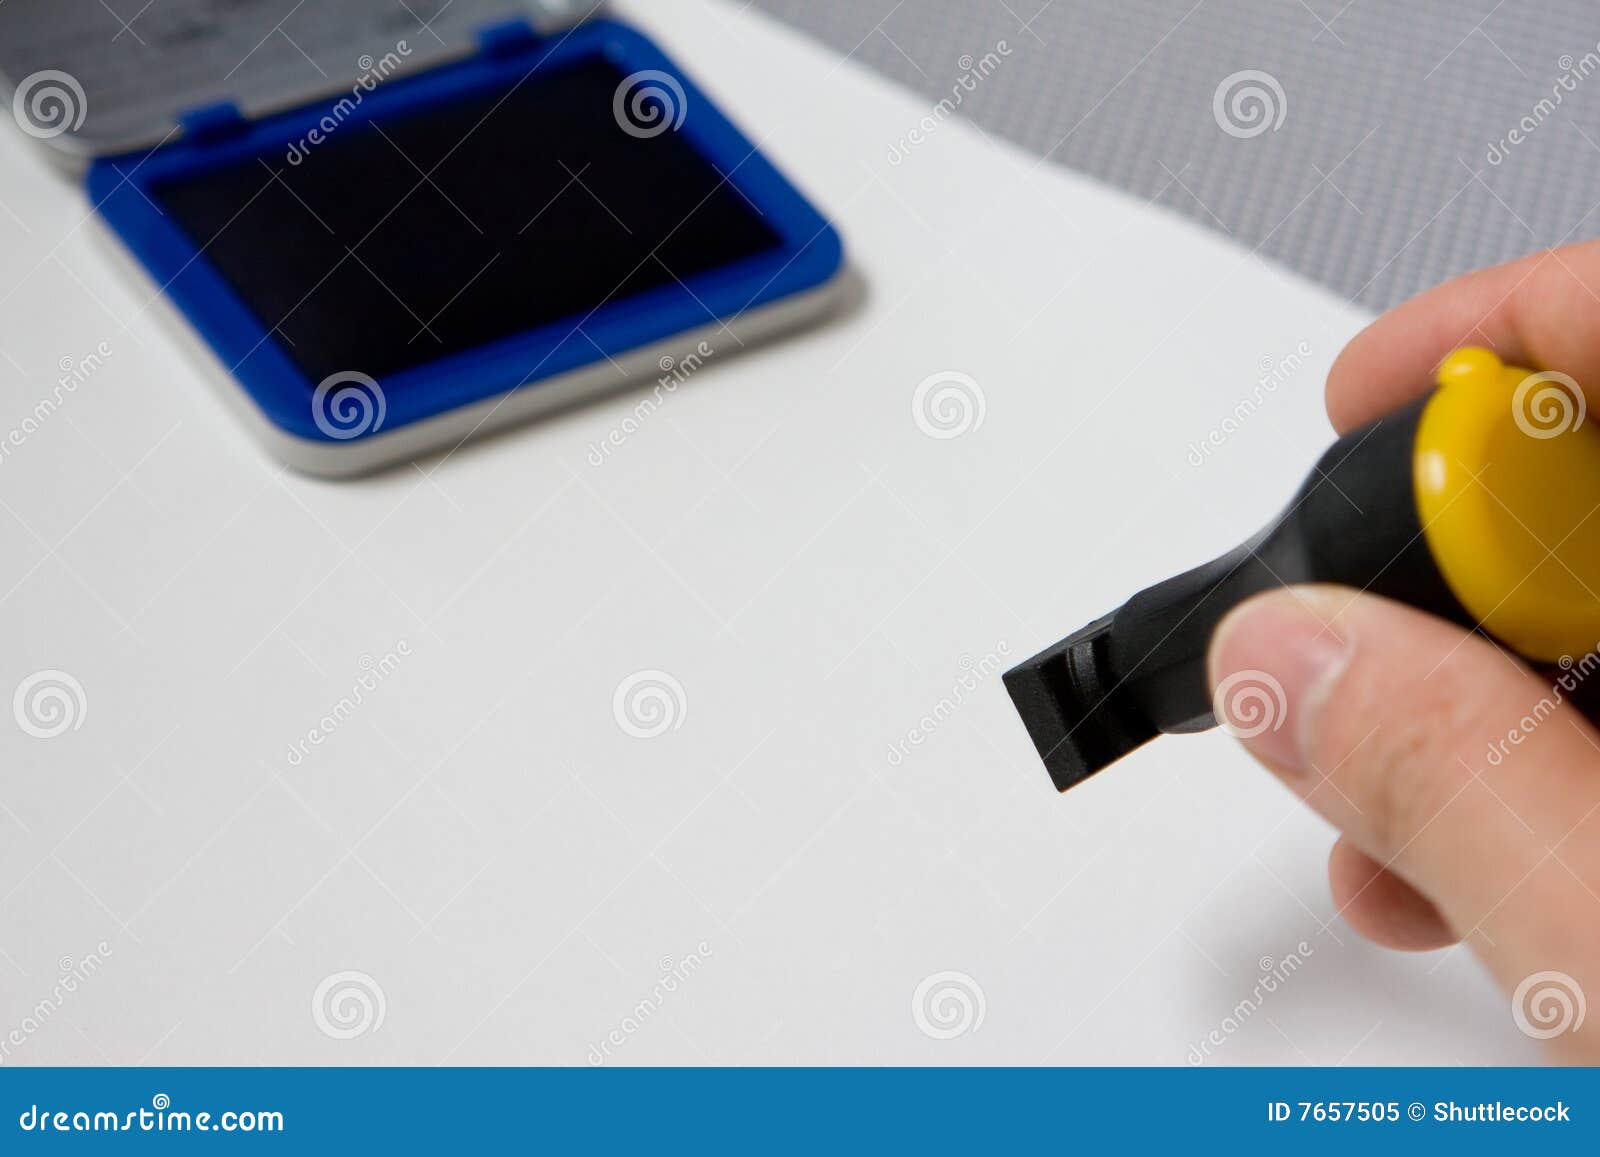 Chop or stamp with ink pad stock image. Image of paper - 7657505